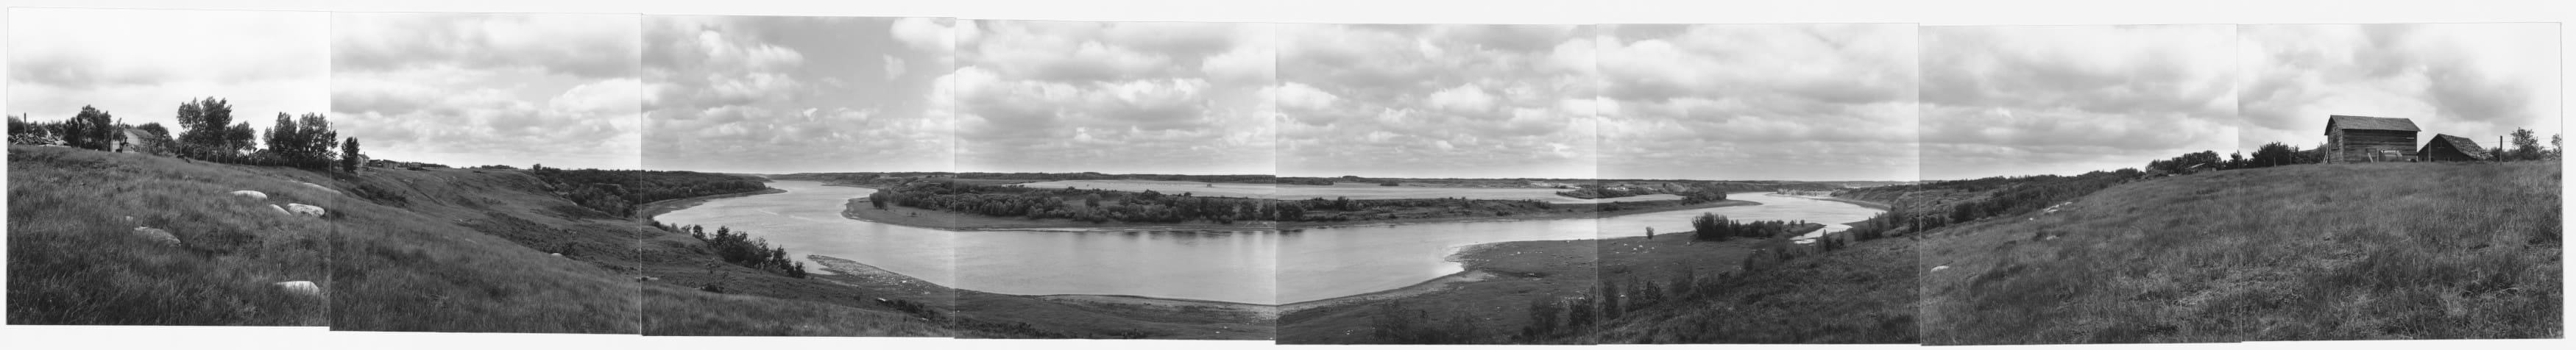 Black and white eight panel panorama of the South Saskatchewan River winding through the prairie landscape.